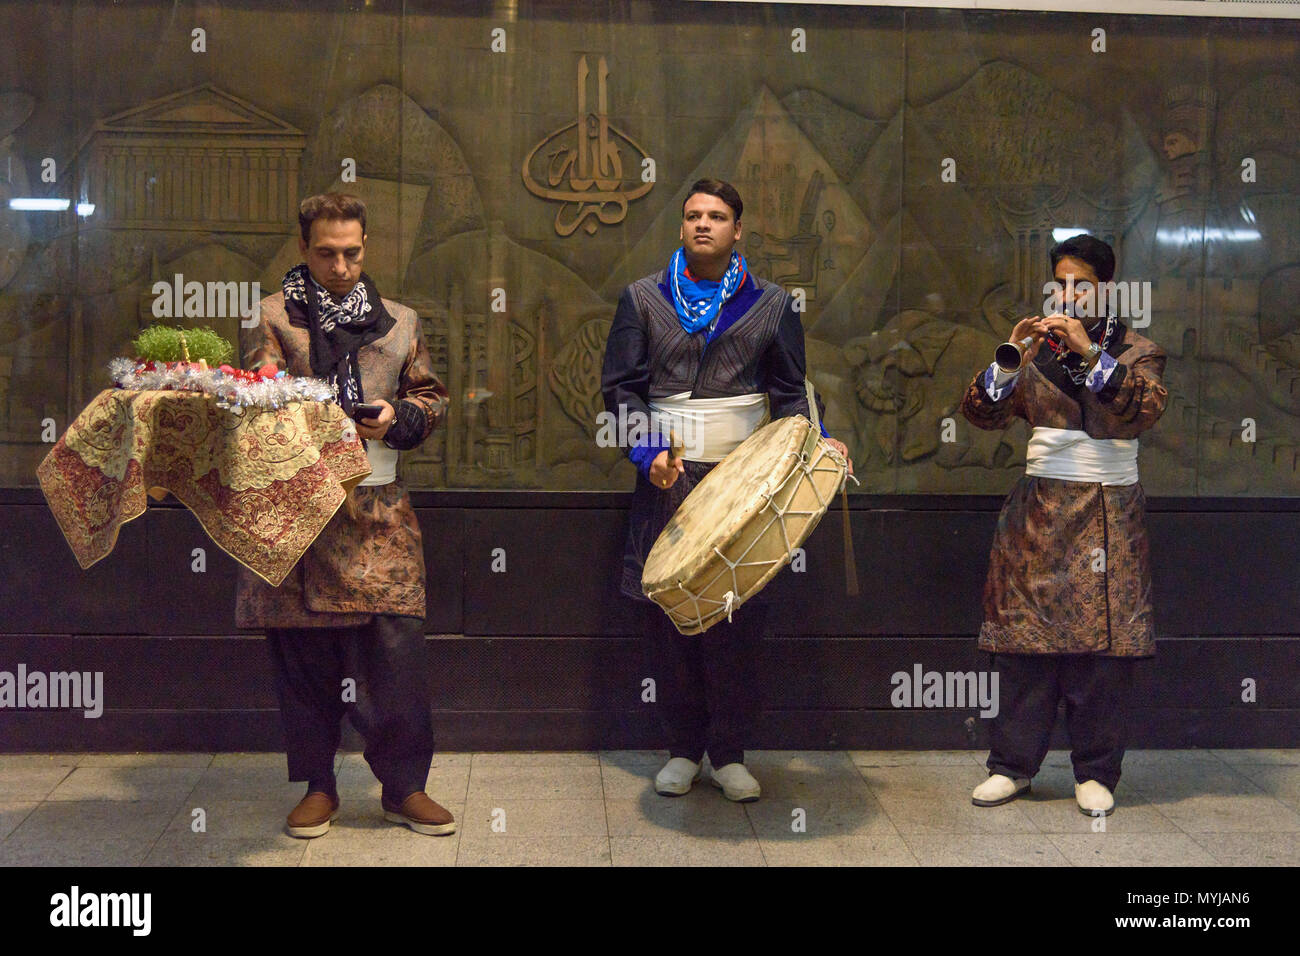 Tehran, Iran - March 19, 2018: Local street musicians play music in the metro station before Nowruz holiday Stock Photo